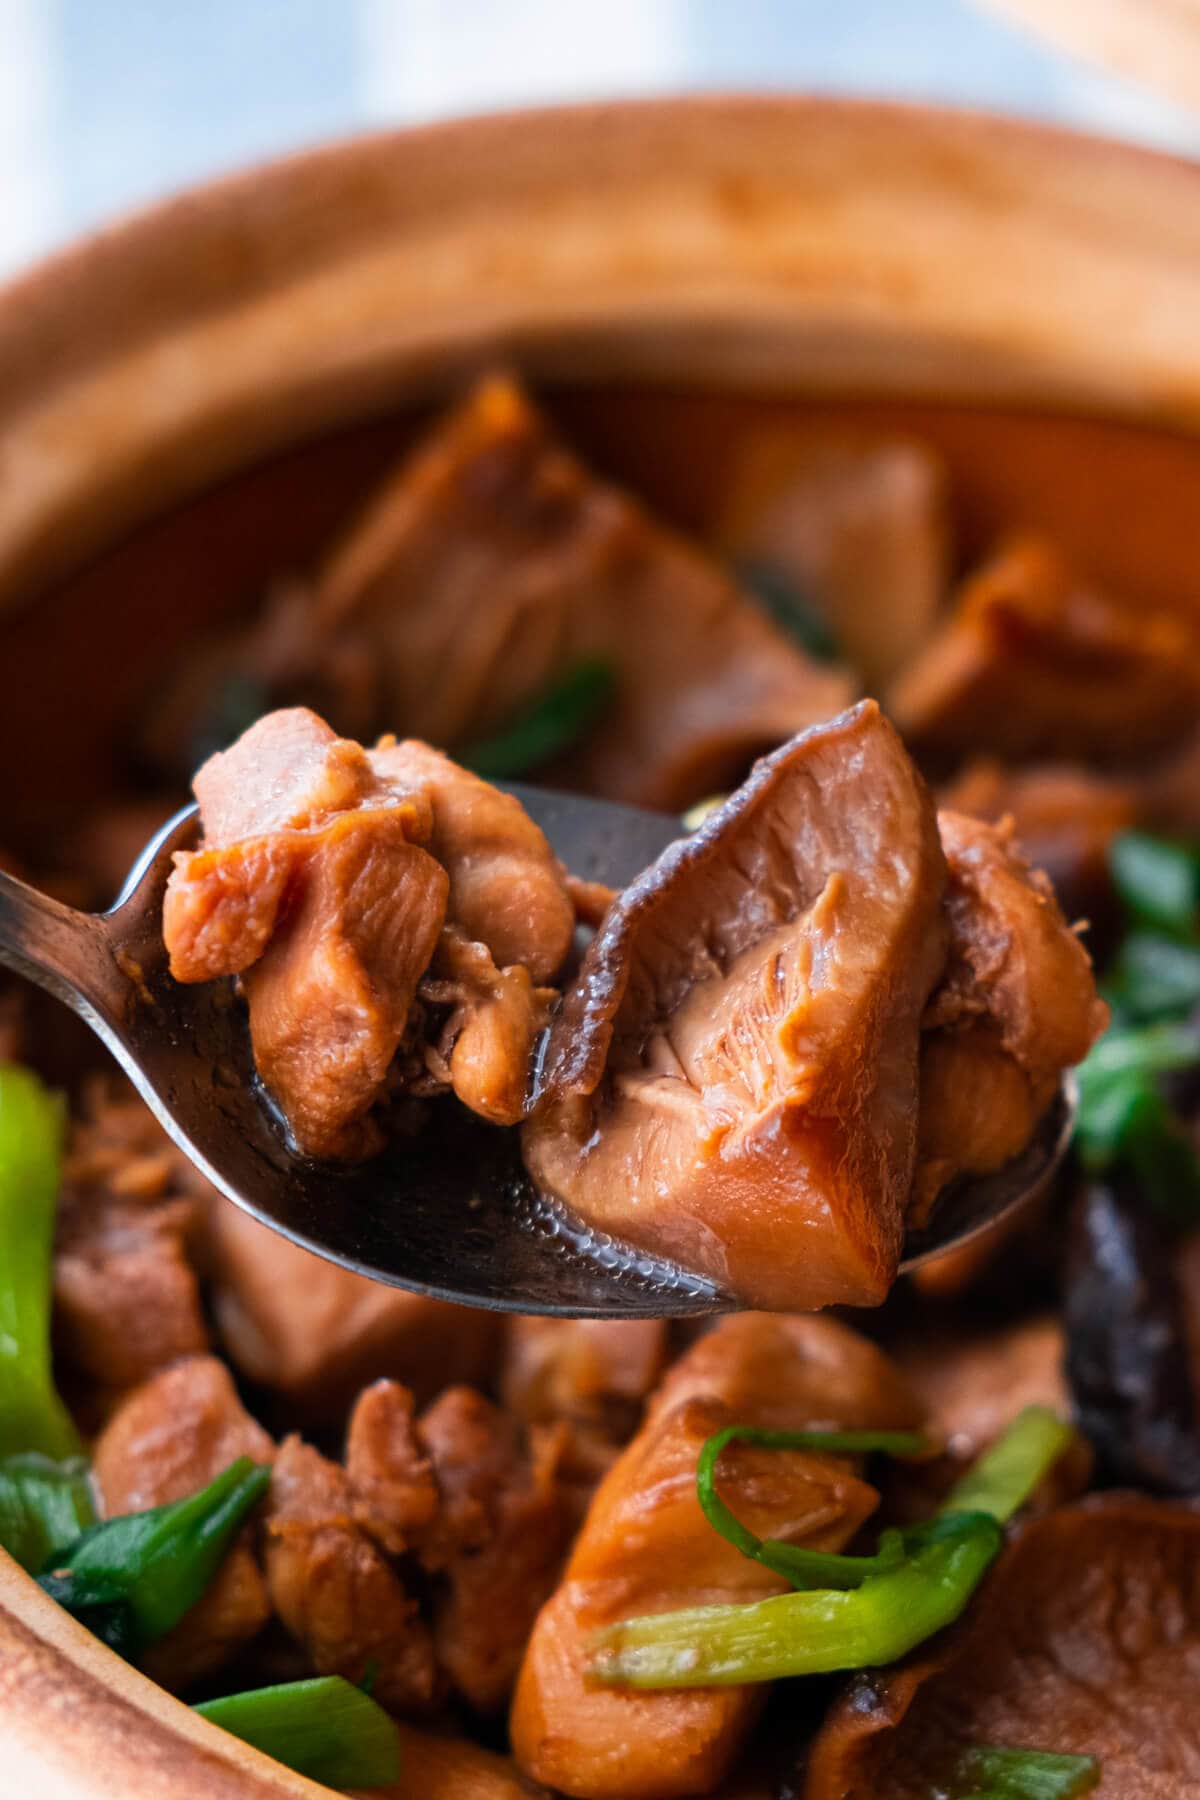 Juicy chicken and mushrooms from the chicken and mushroom stew on a spoon.